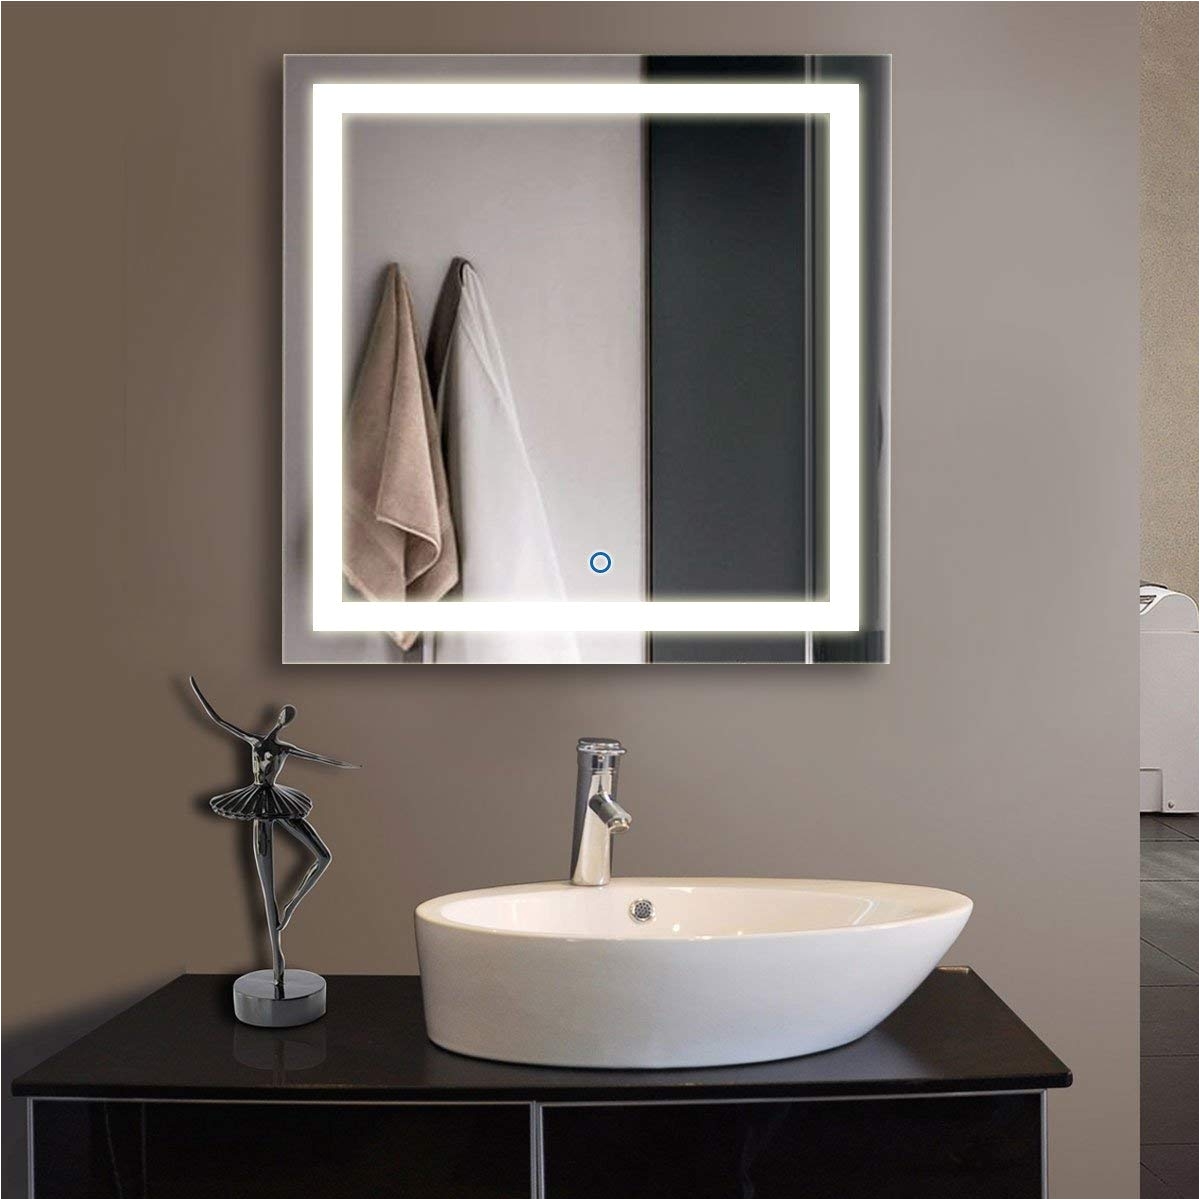 amazon com 48 x 36 in horizontal led bathroom silvered mirror with touch button d ck010 d toys games